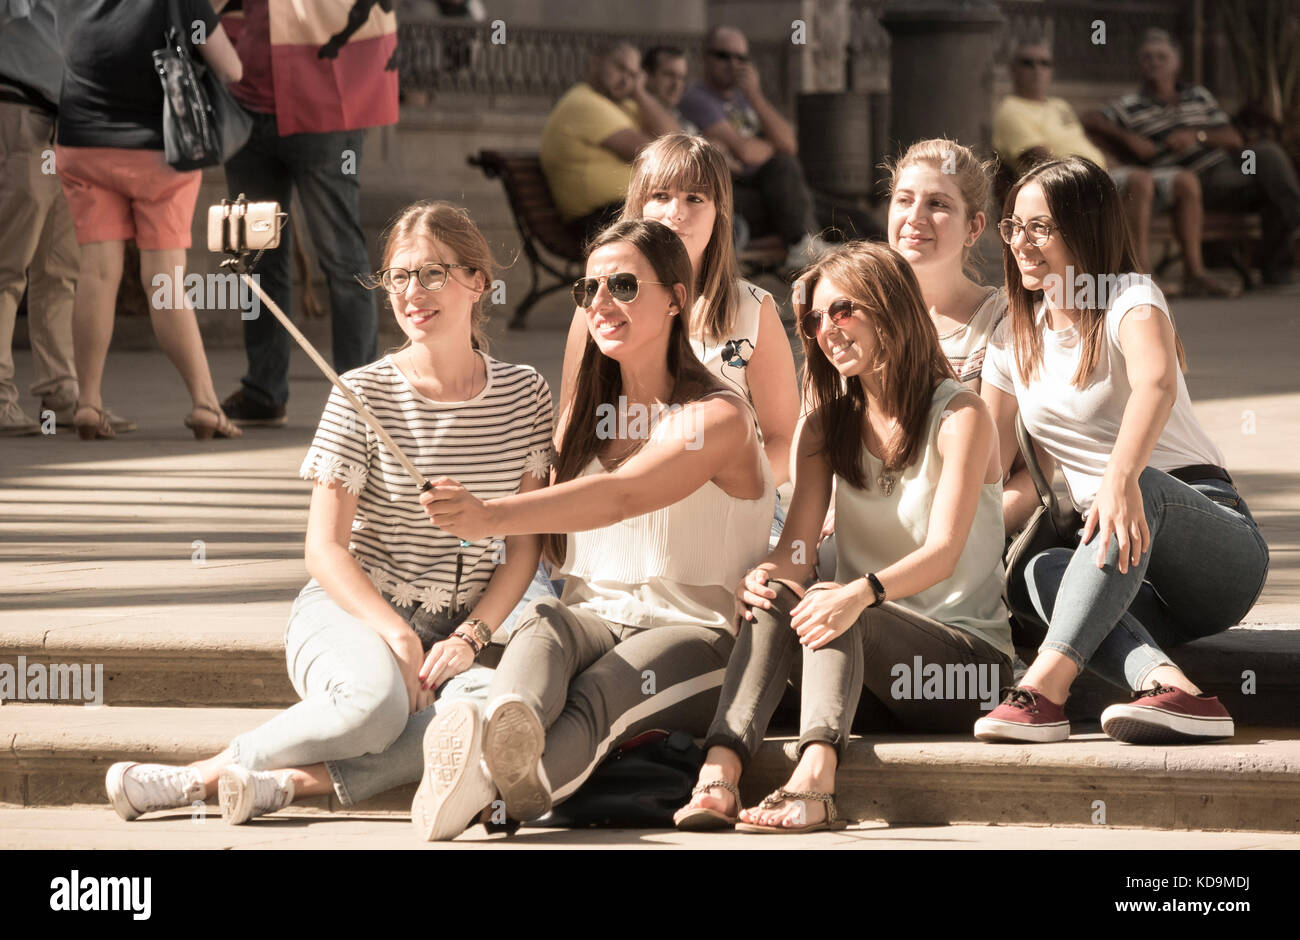 Group of young women taking selfie in Spain Stock Photo